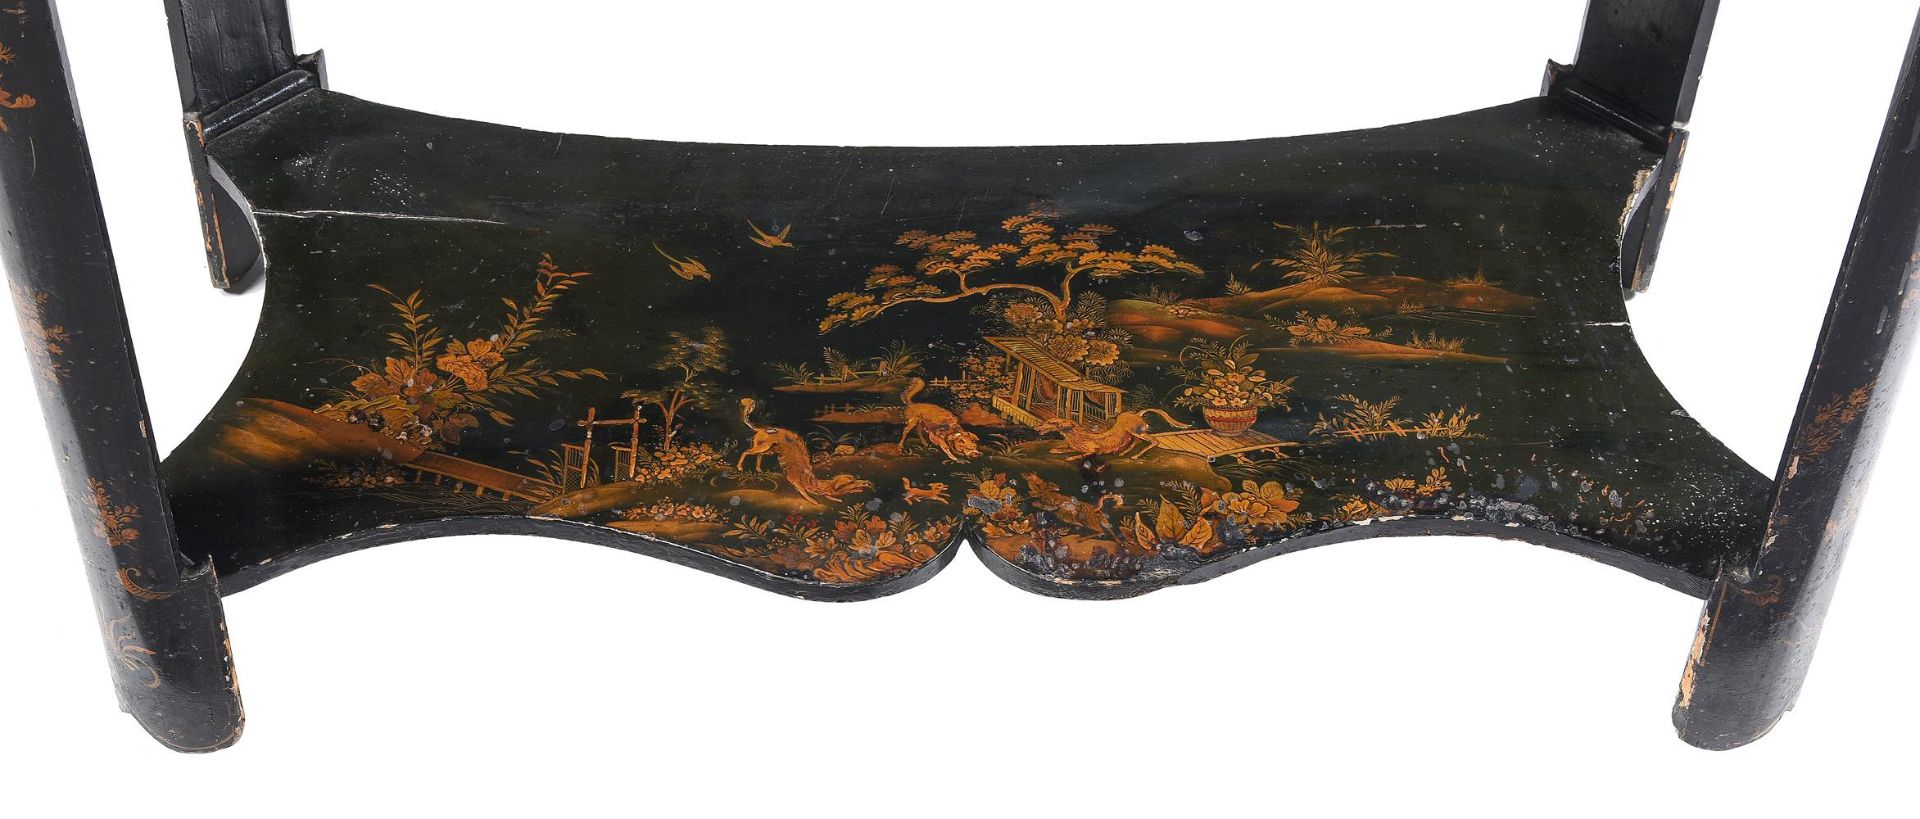 A BLACK LACQUER AND GILT CHINOISERIE DECORATED CABINET ON STAND, 18TH CENTURY - Image 6 of 7